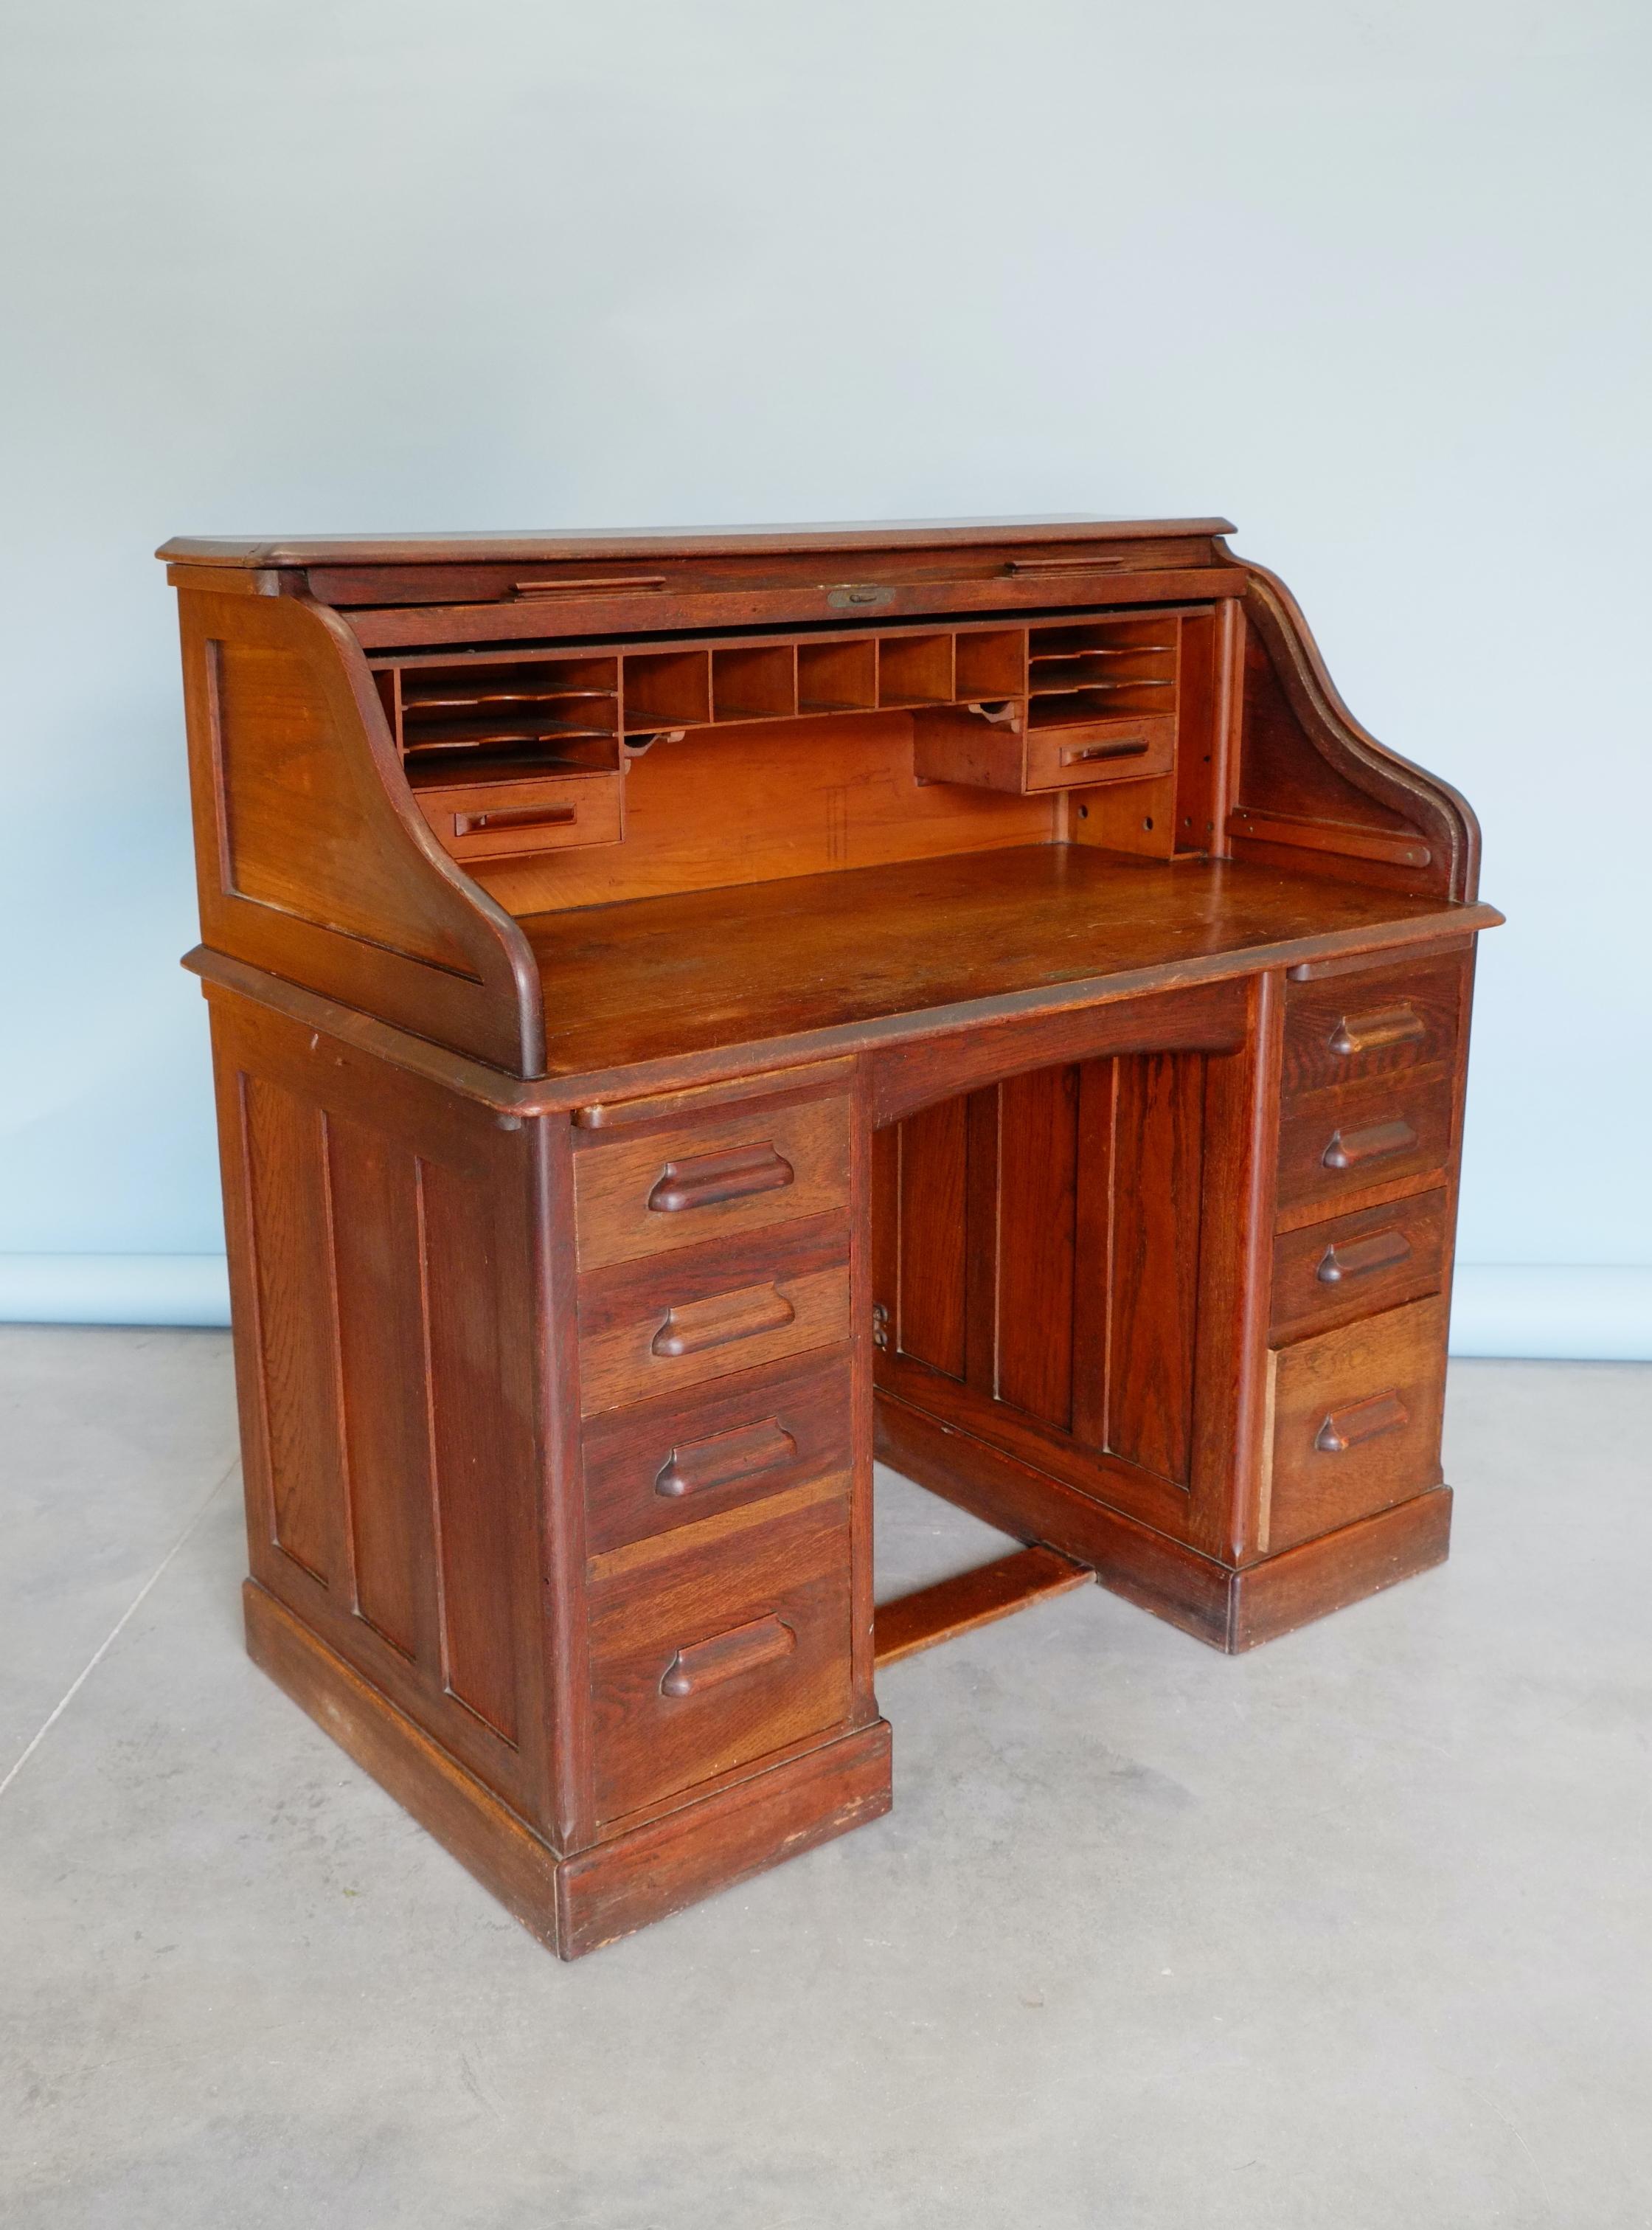 Beautiful English Edwardian double pedestal, roll top oak desk. Handsomely made by ‘HLL’ Harris Lebus, London ‘Entirely English Make’. Classic English solid oak desk from the early 1900's. Fitted with so many drawers, writing trays and pigeon holes